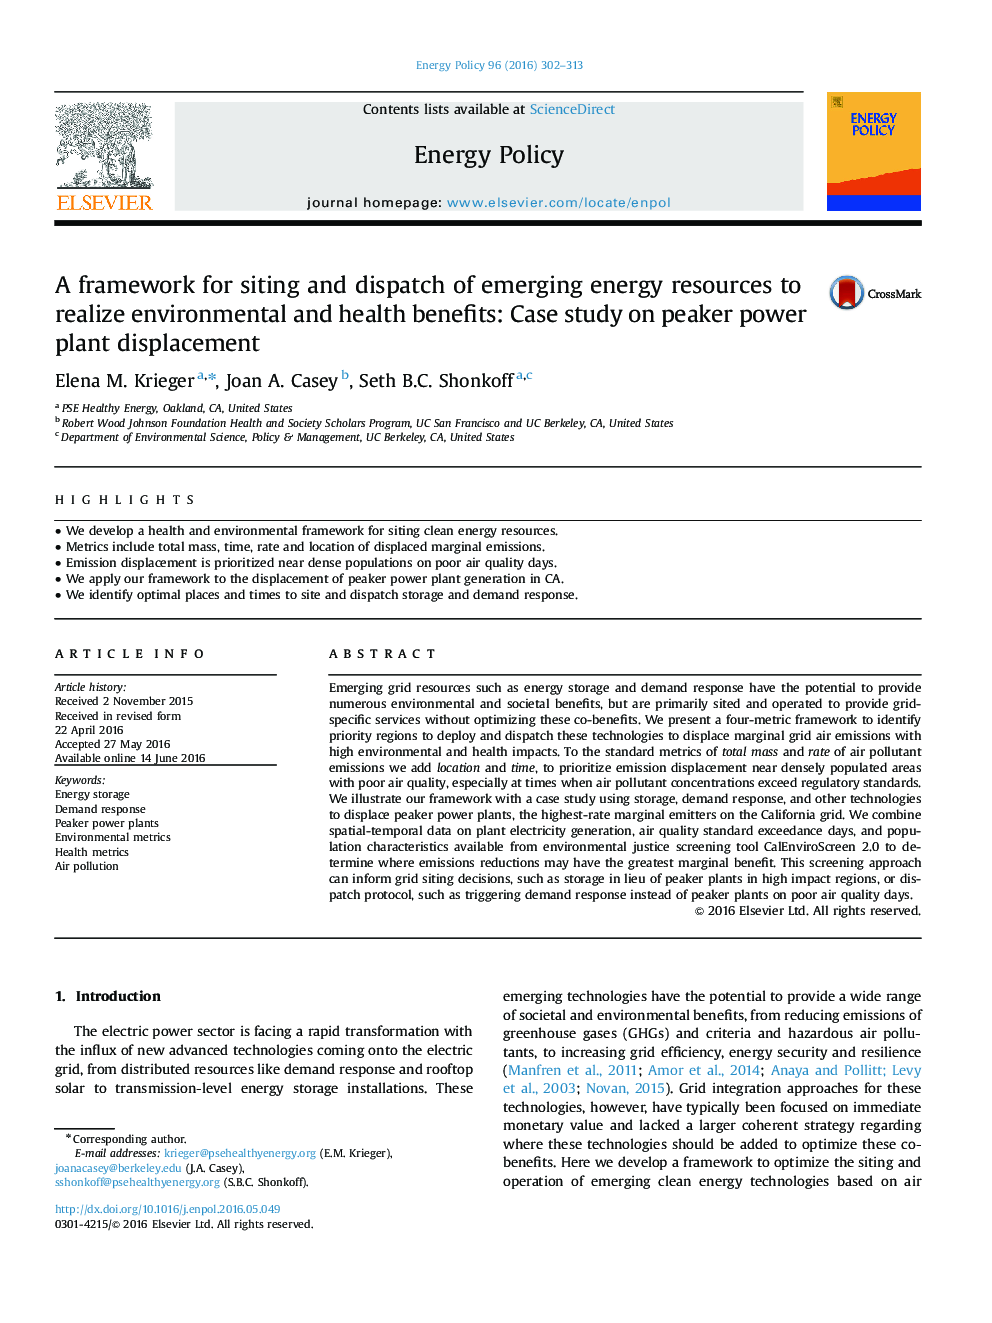 A framework for siting and dispatch of emerging energy resources to realize environmental and health benefits: Case study on peaker power plant displacement